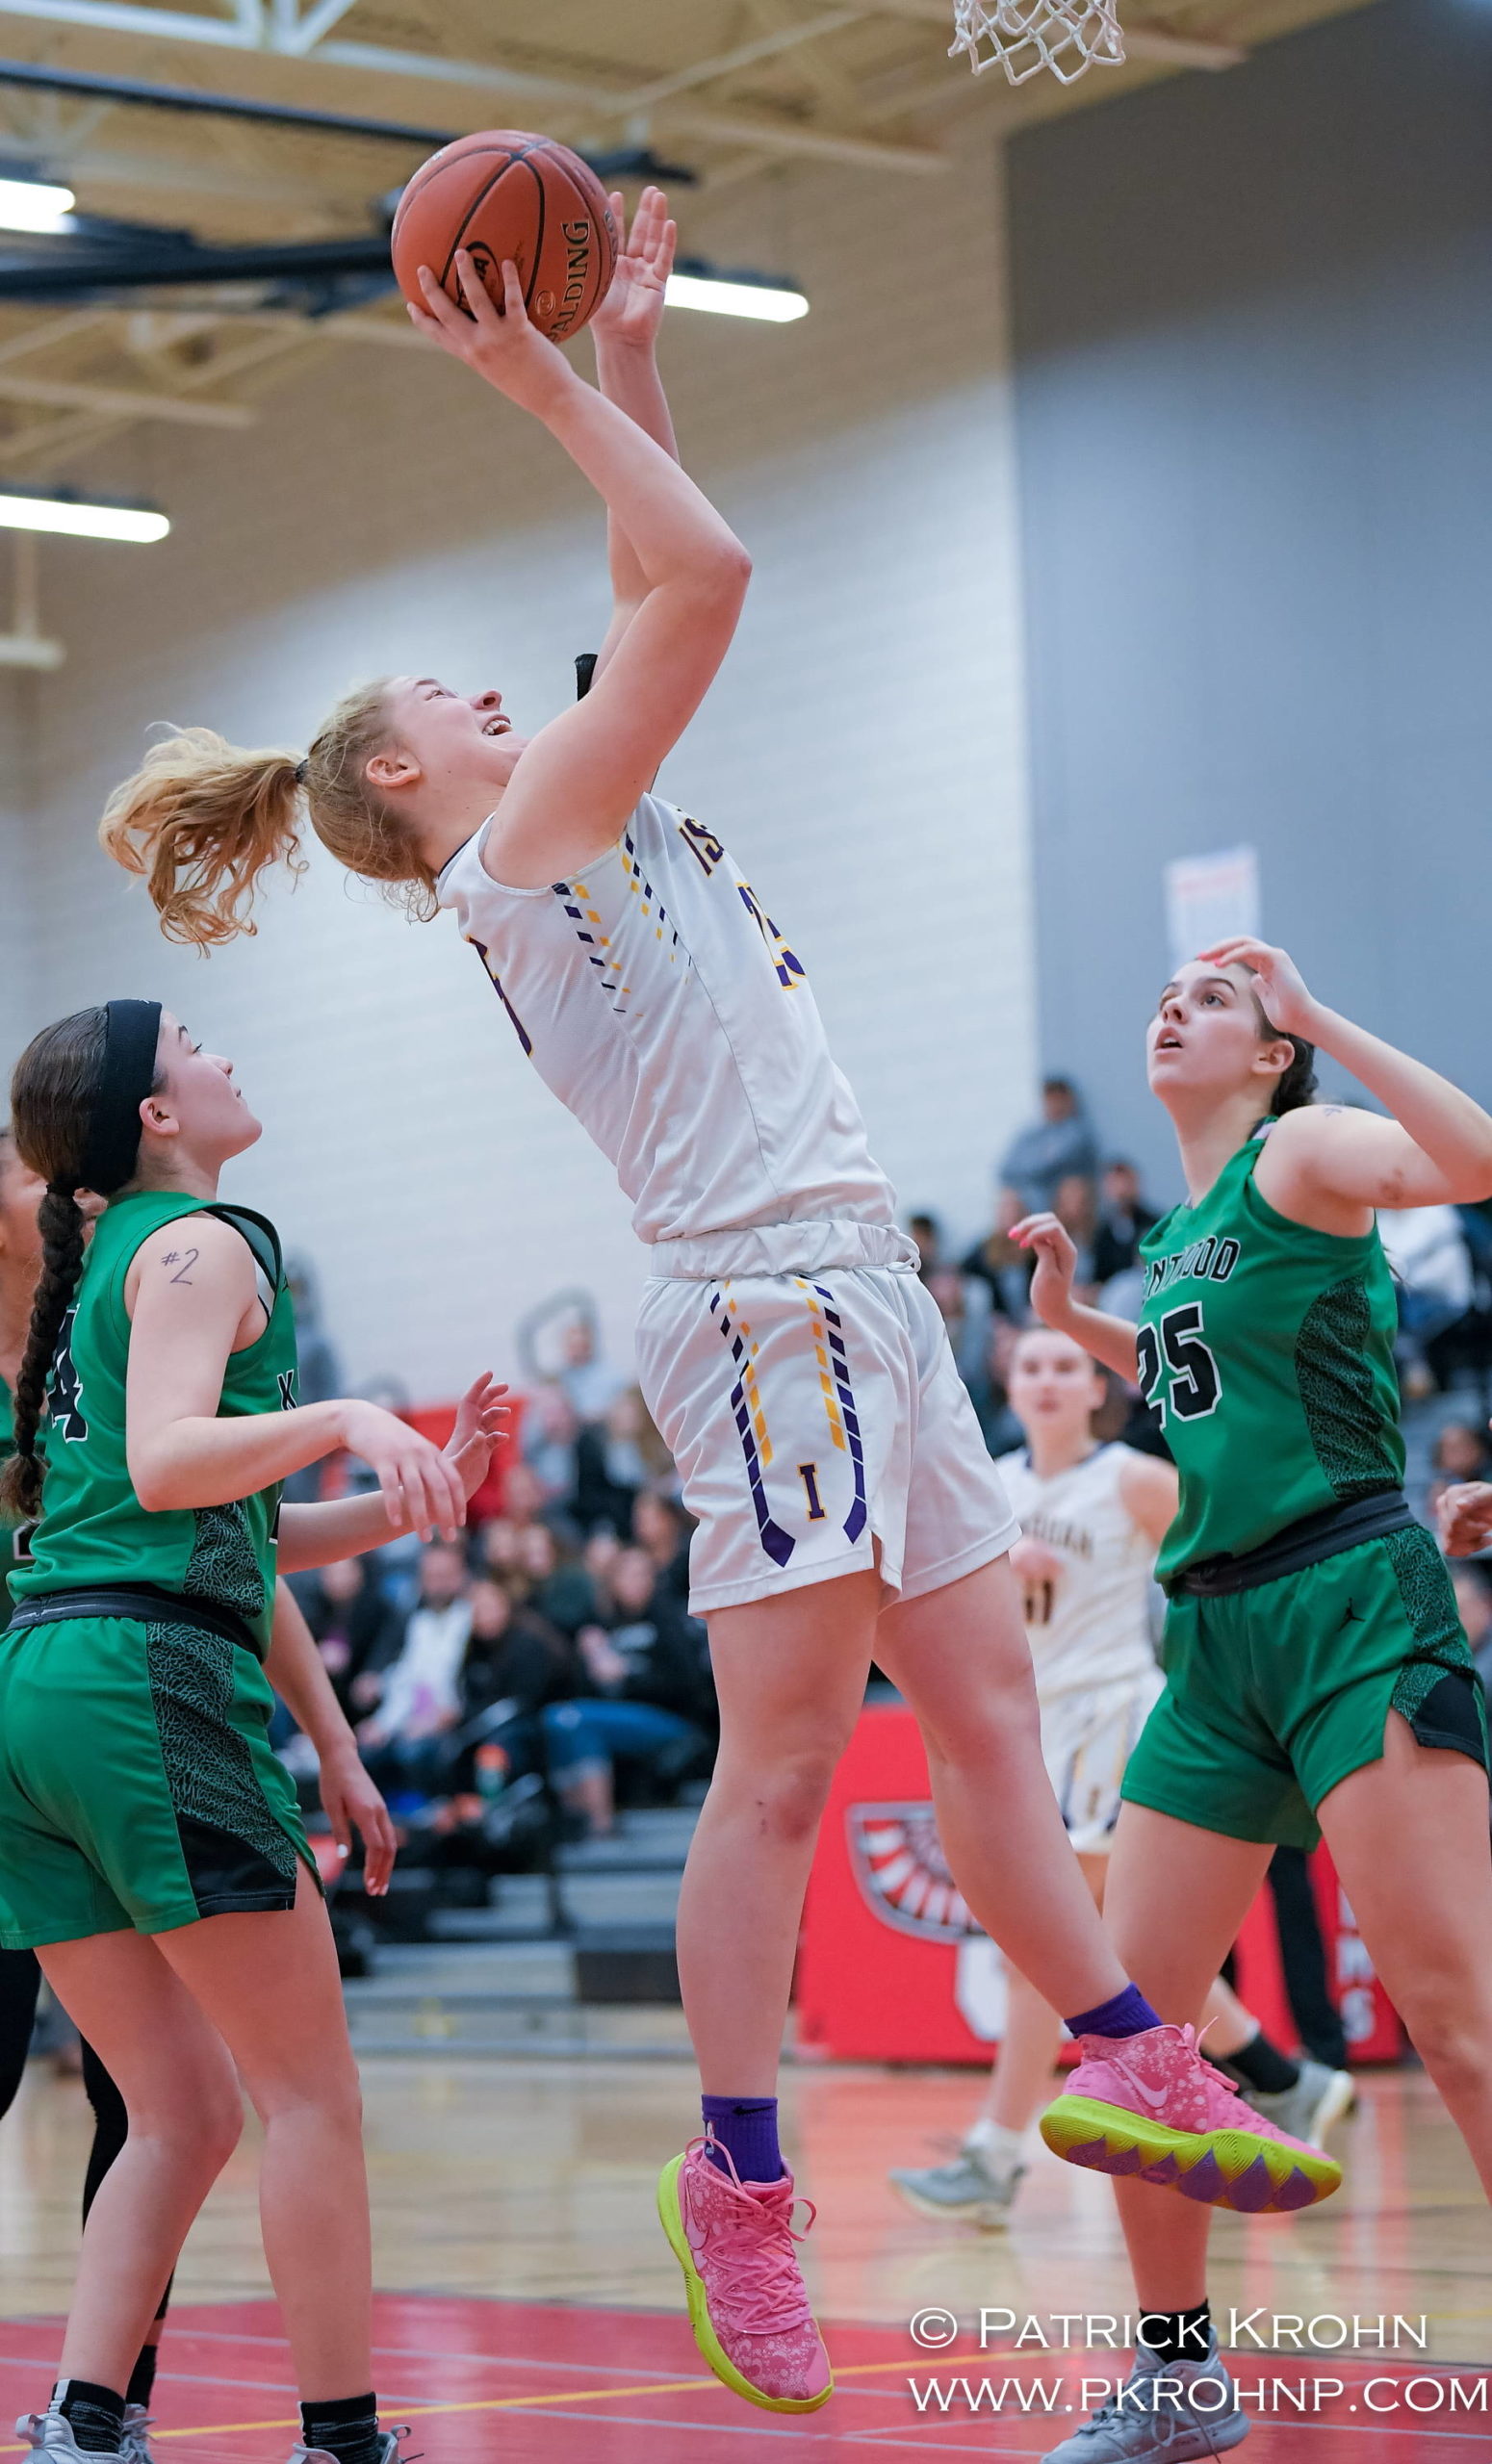 Issaquah sophomore Mercedes Tinder puts up a shot during the Eagles’ 67-50 victory over Kentwood on Feb. 29 at Sammamish High School. Photo courtesy of Patrick Krohn/Patrick Krohn Photography